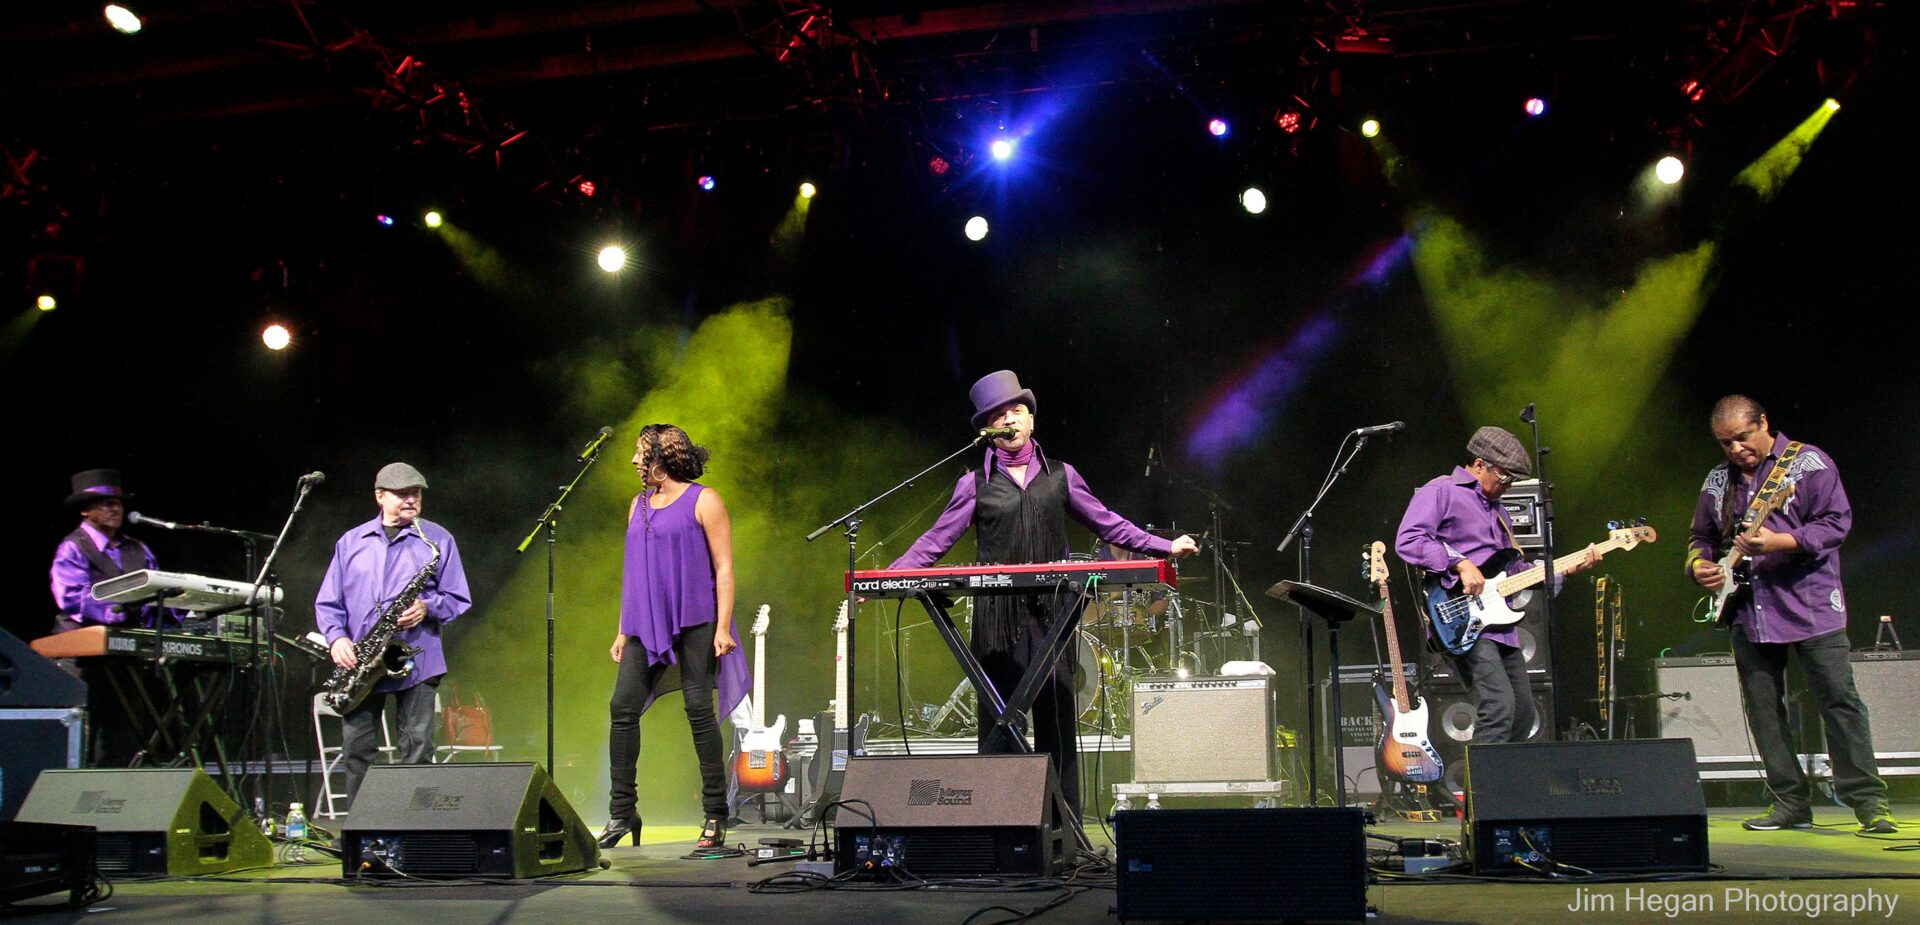 The Family Stone band performing on a stage together